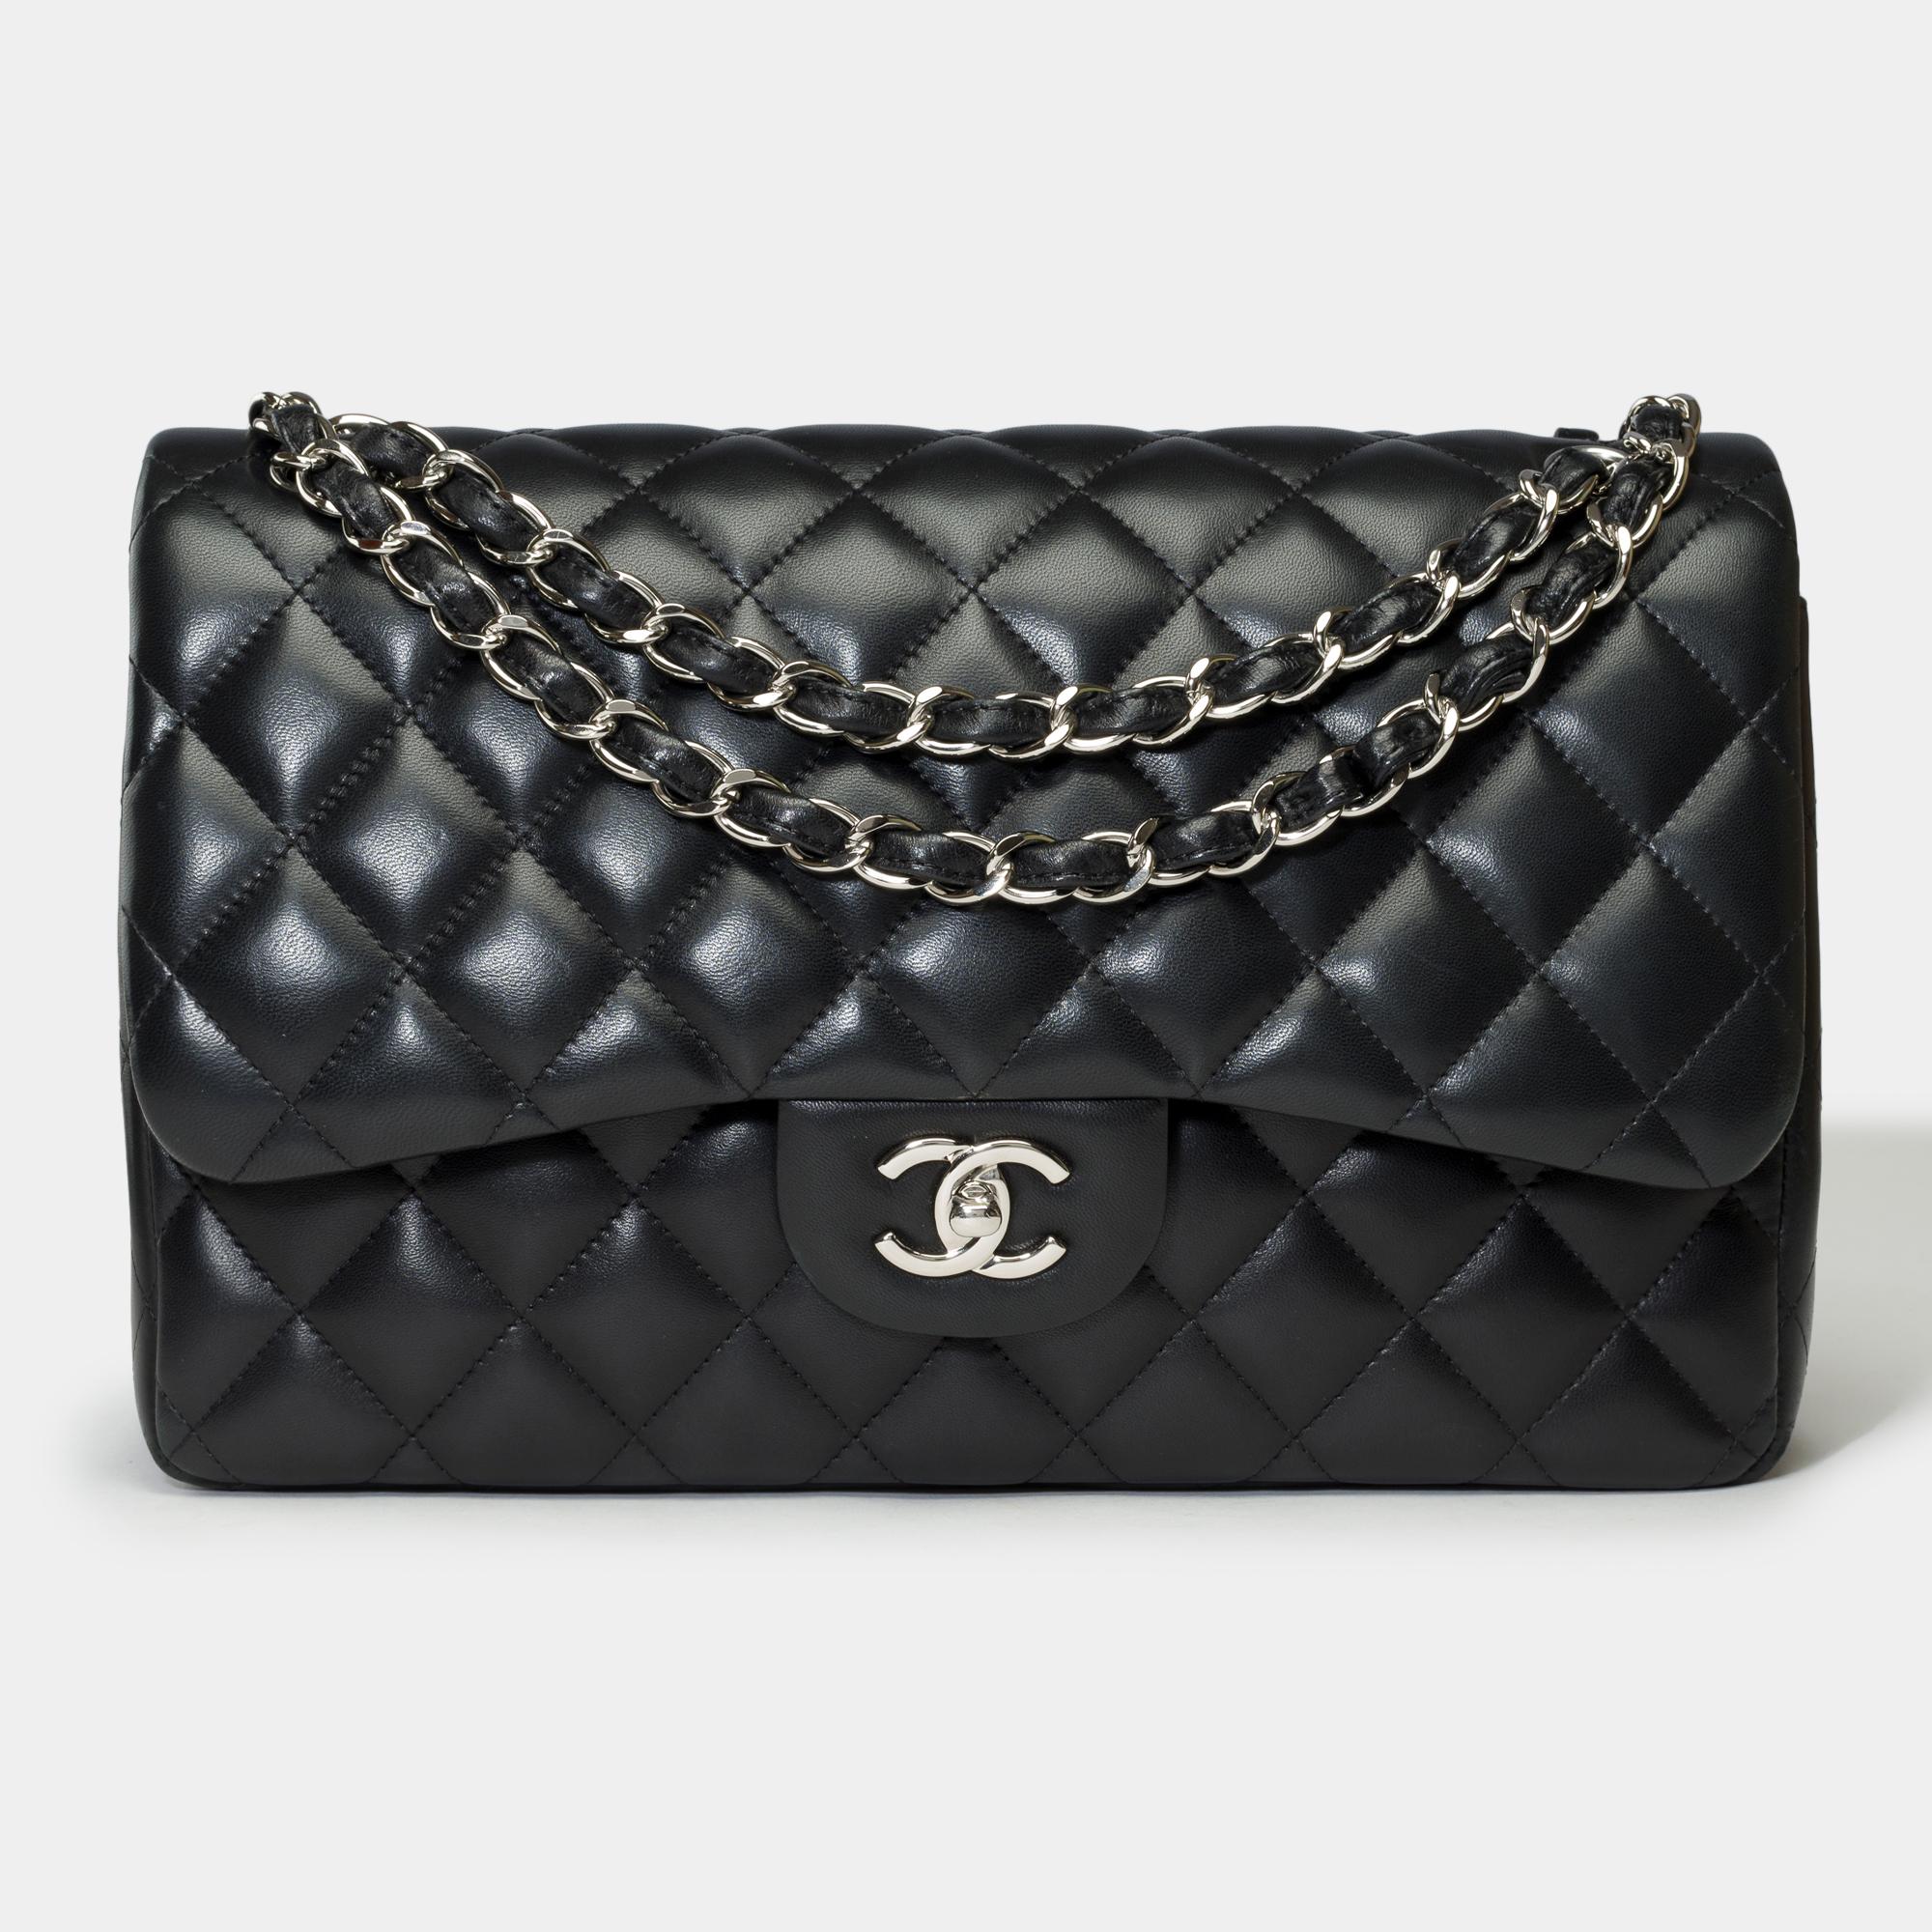 Majestic​ ​Chanel​ ​Timeless​ ​Jumbo​ ​double​ ​flap​ ​shoulder​ ​bag​ ​in​ ​black​ ​quilted​ ​lambskin​ ​leather,​ ​silver​ ​metal​ ​trim,​ ​a​ ​silver​ ​metal​ ​chain​ ​handle​ ​interlaced​ ​with​ ​black​ ​leather​ ​for​ ​a​ ​carry​ ​hand​ ​or​